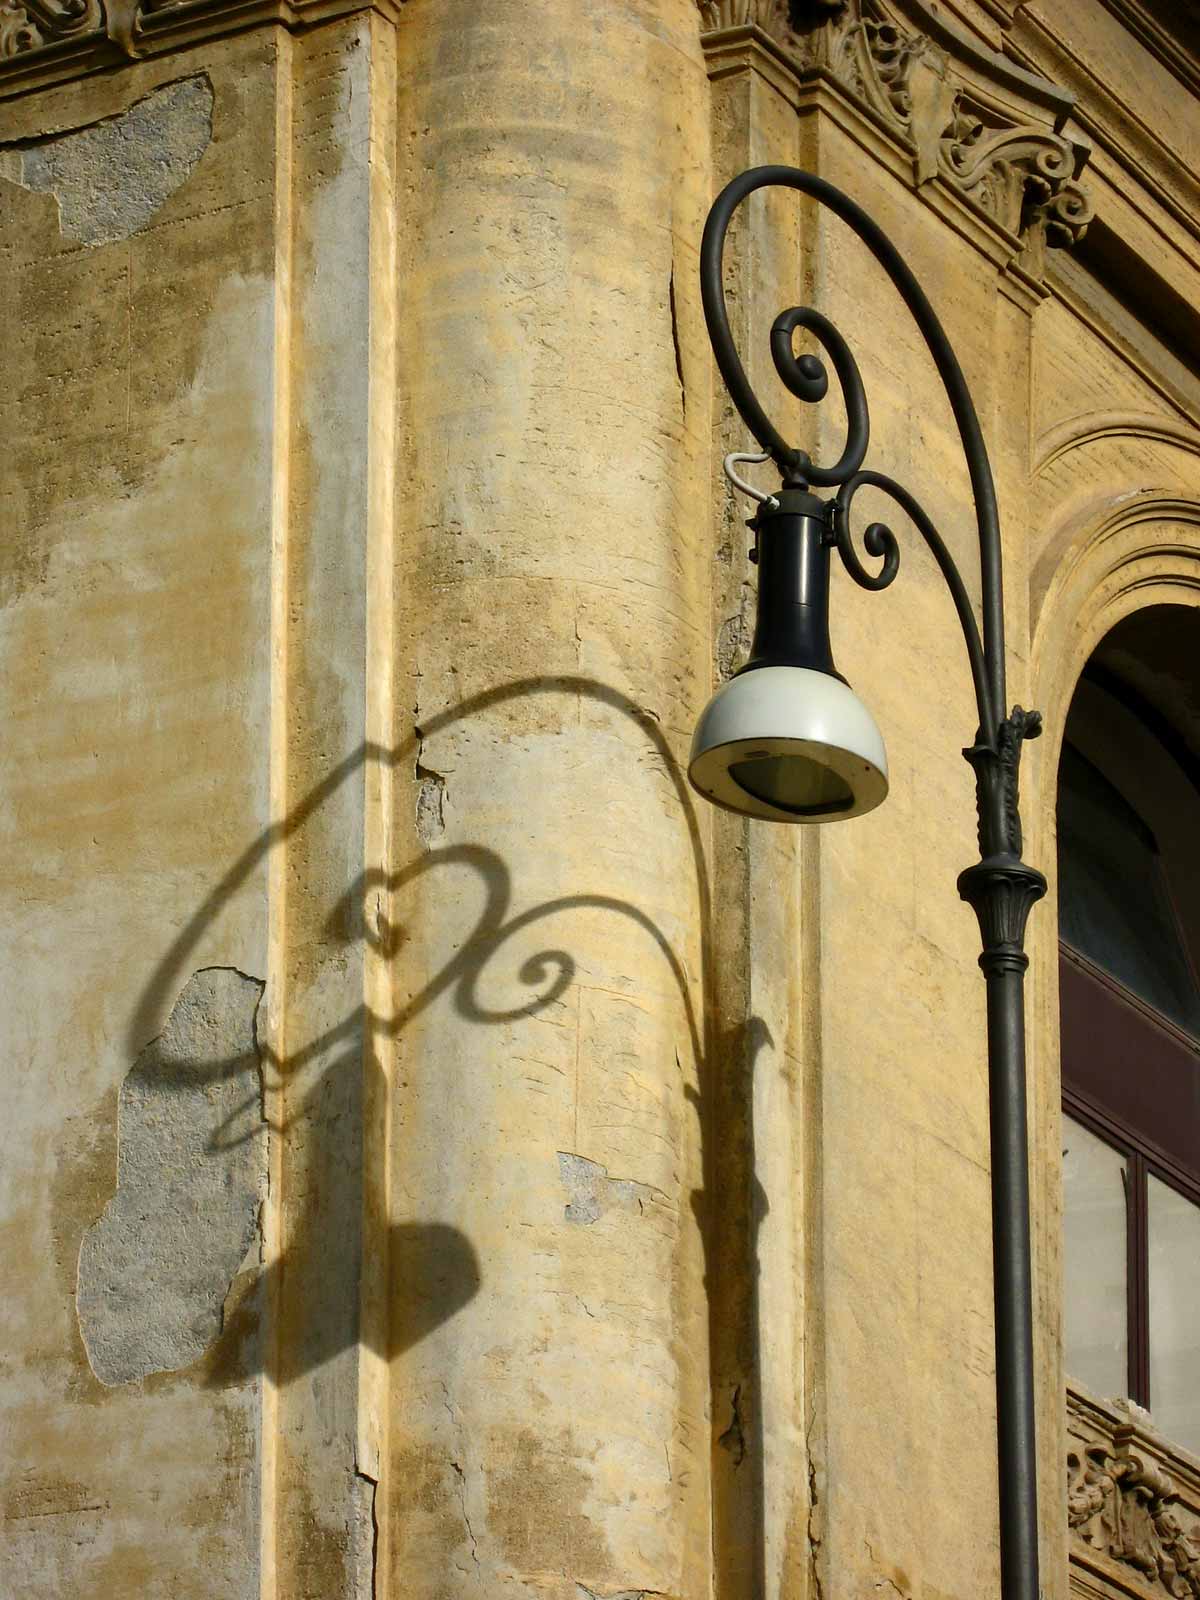 a street light sitting next to an old building